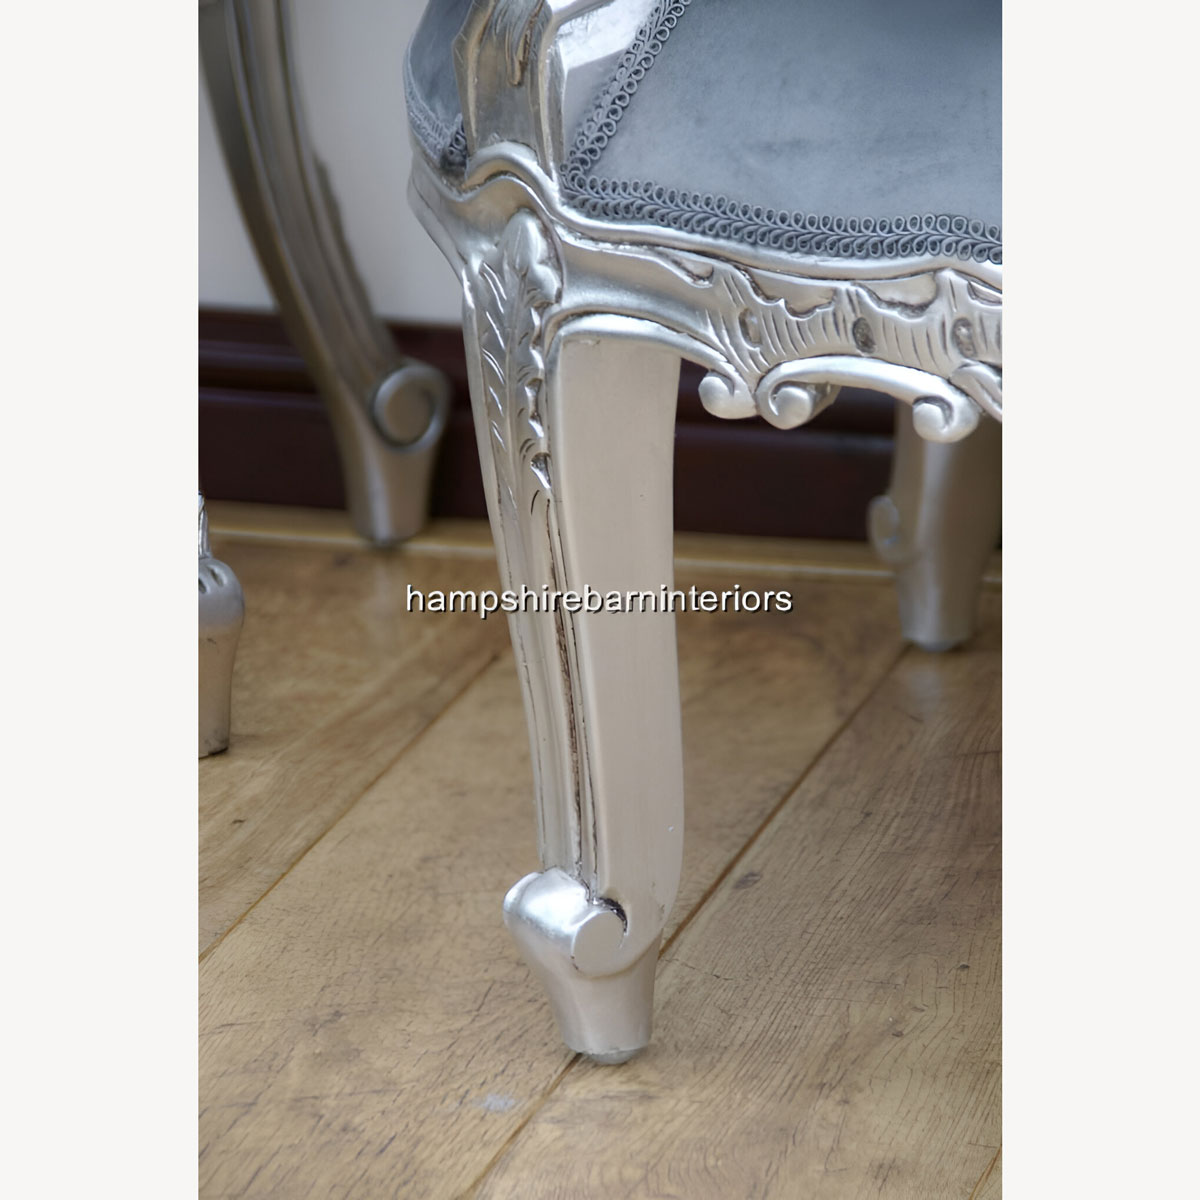 Anna Belle Chaise In Silver Leaf And Silver Grey Velvet Or Gold Leaf With Gold Velvet 3 - Hampshire Barn Interiors - Anna Belle Chaise In Silver Leaf And Silver Grey Velvet Or Gold Leaf With Gold Velvet -